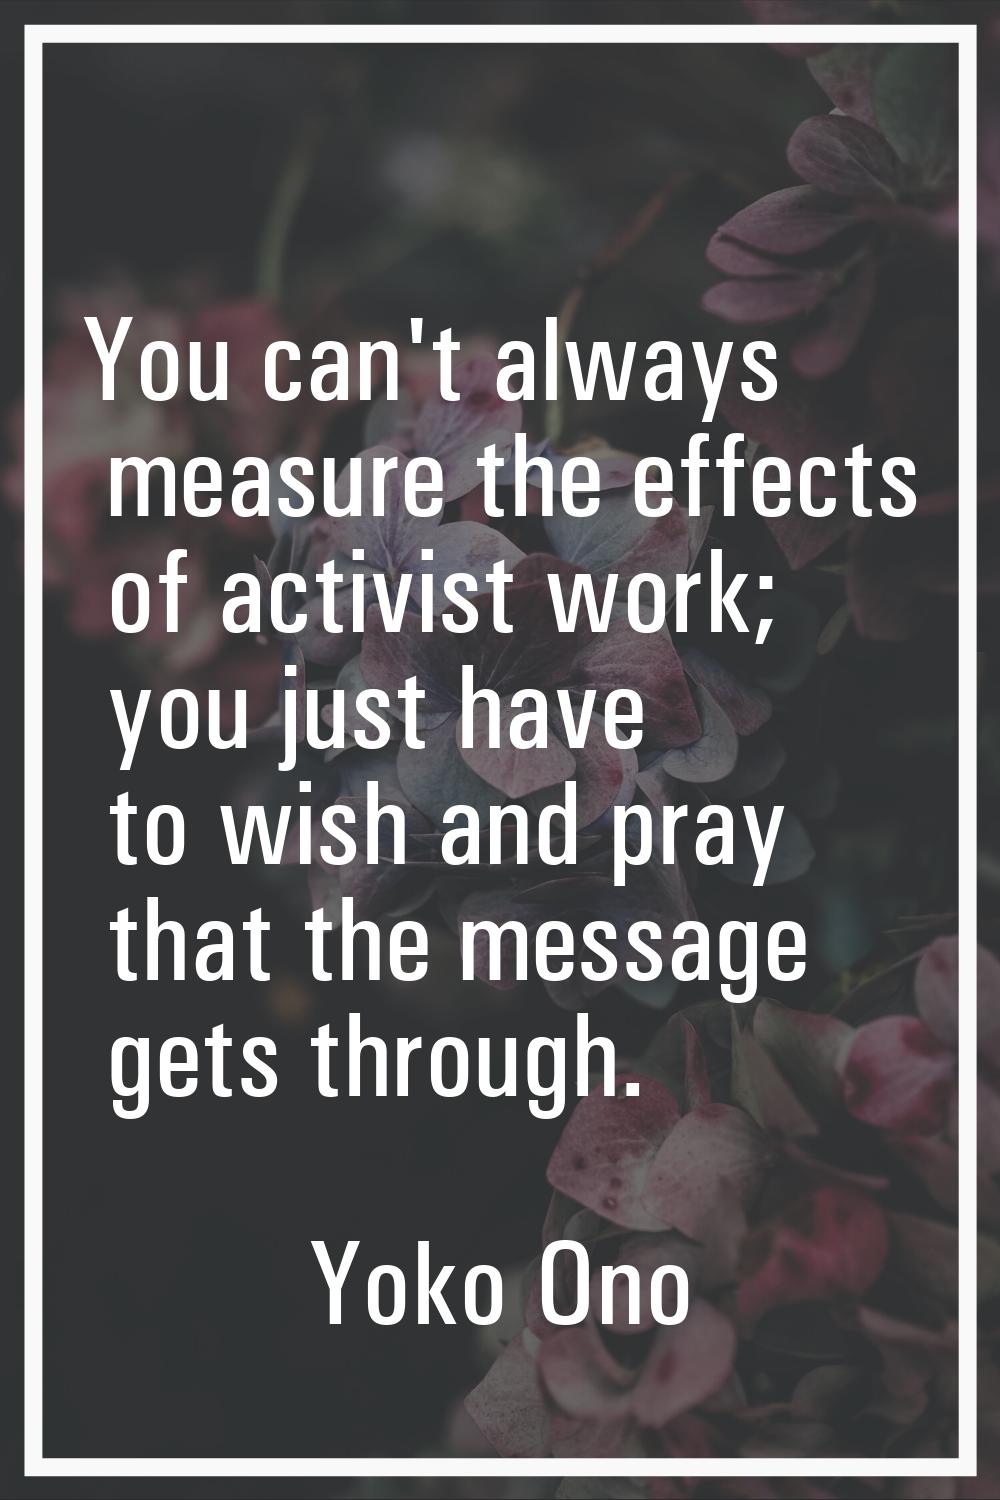 You can't always measure the effects of activist work; you just have to wish and pray that the mess